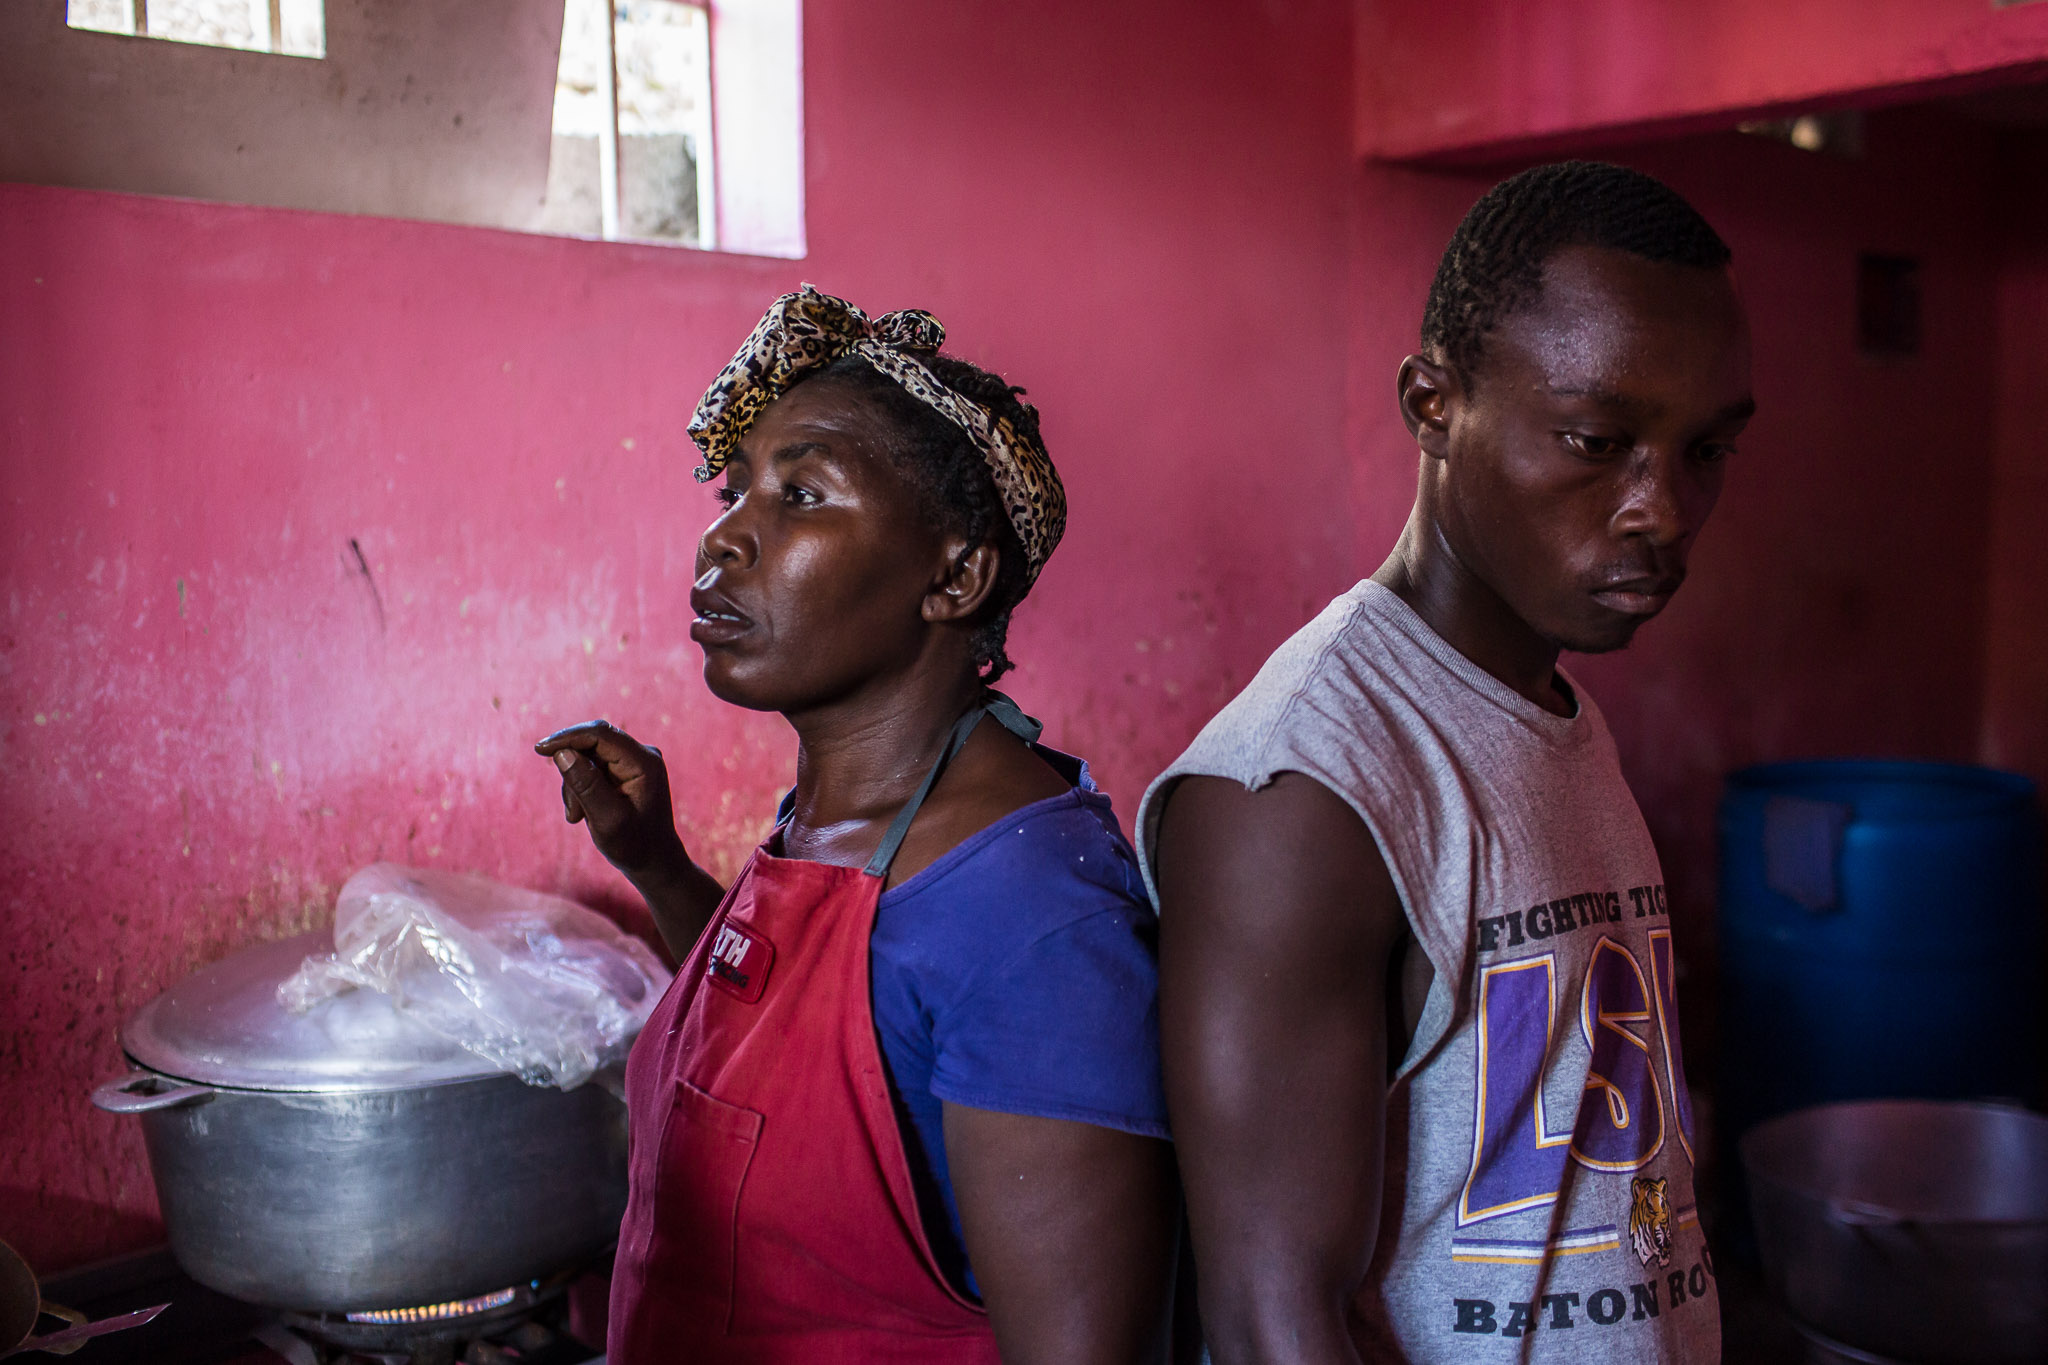  Kitchen workers at a restaurant in the Tapis Rouge neighborhood on Monday, December 22, 2014 in Port-au-Prince, Haiti. The restaurant was initially funded as a government program, and is required to serve meals that cost the equivalent of less than 